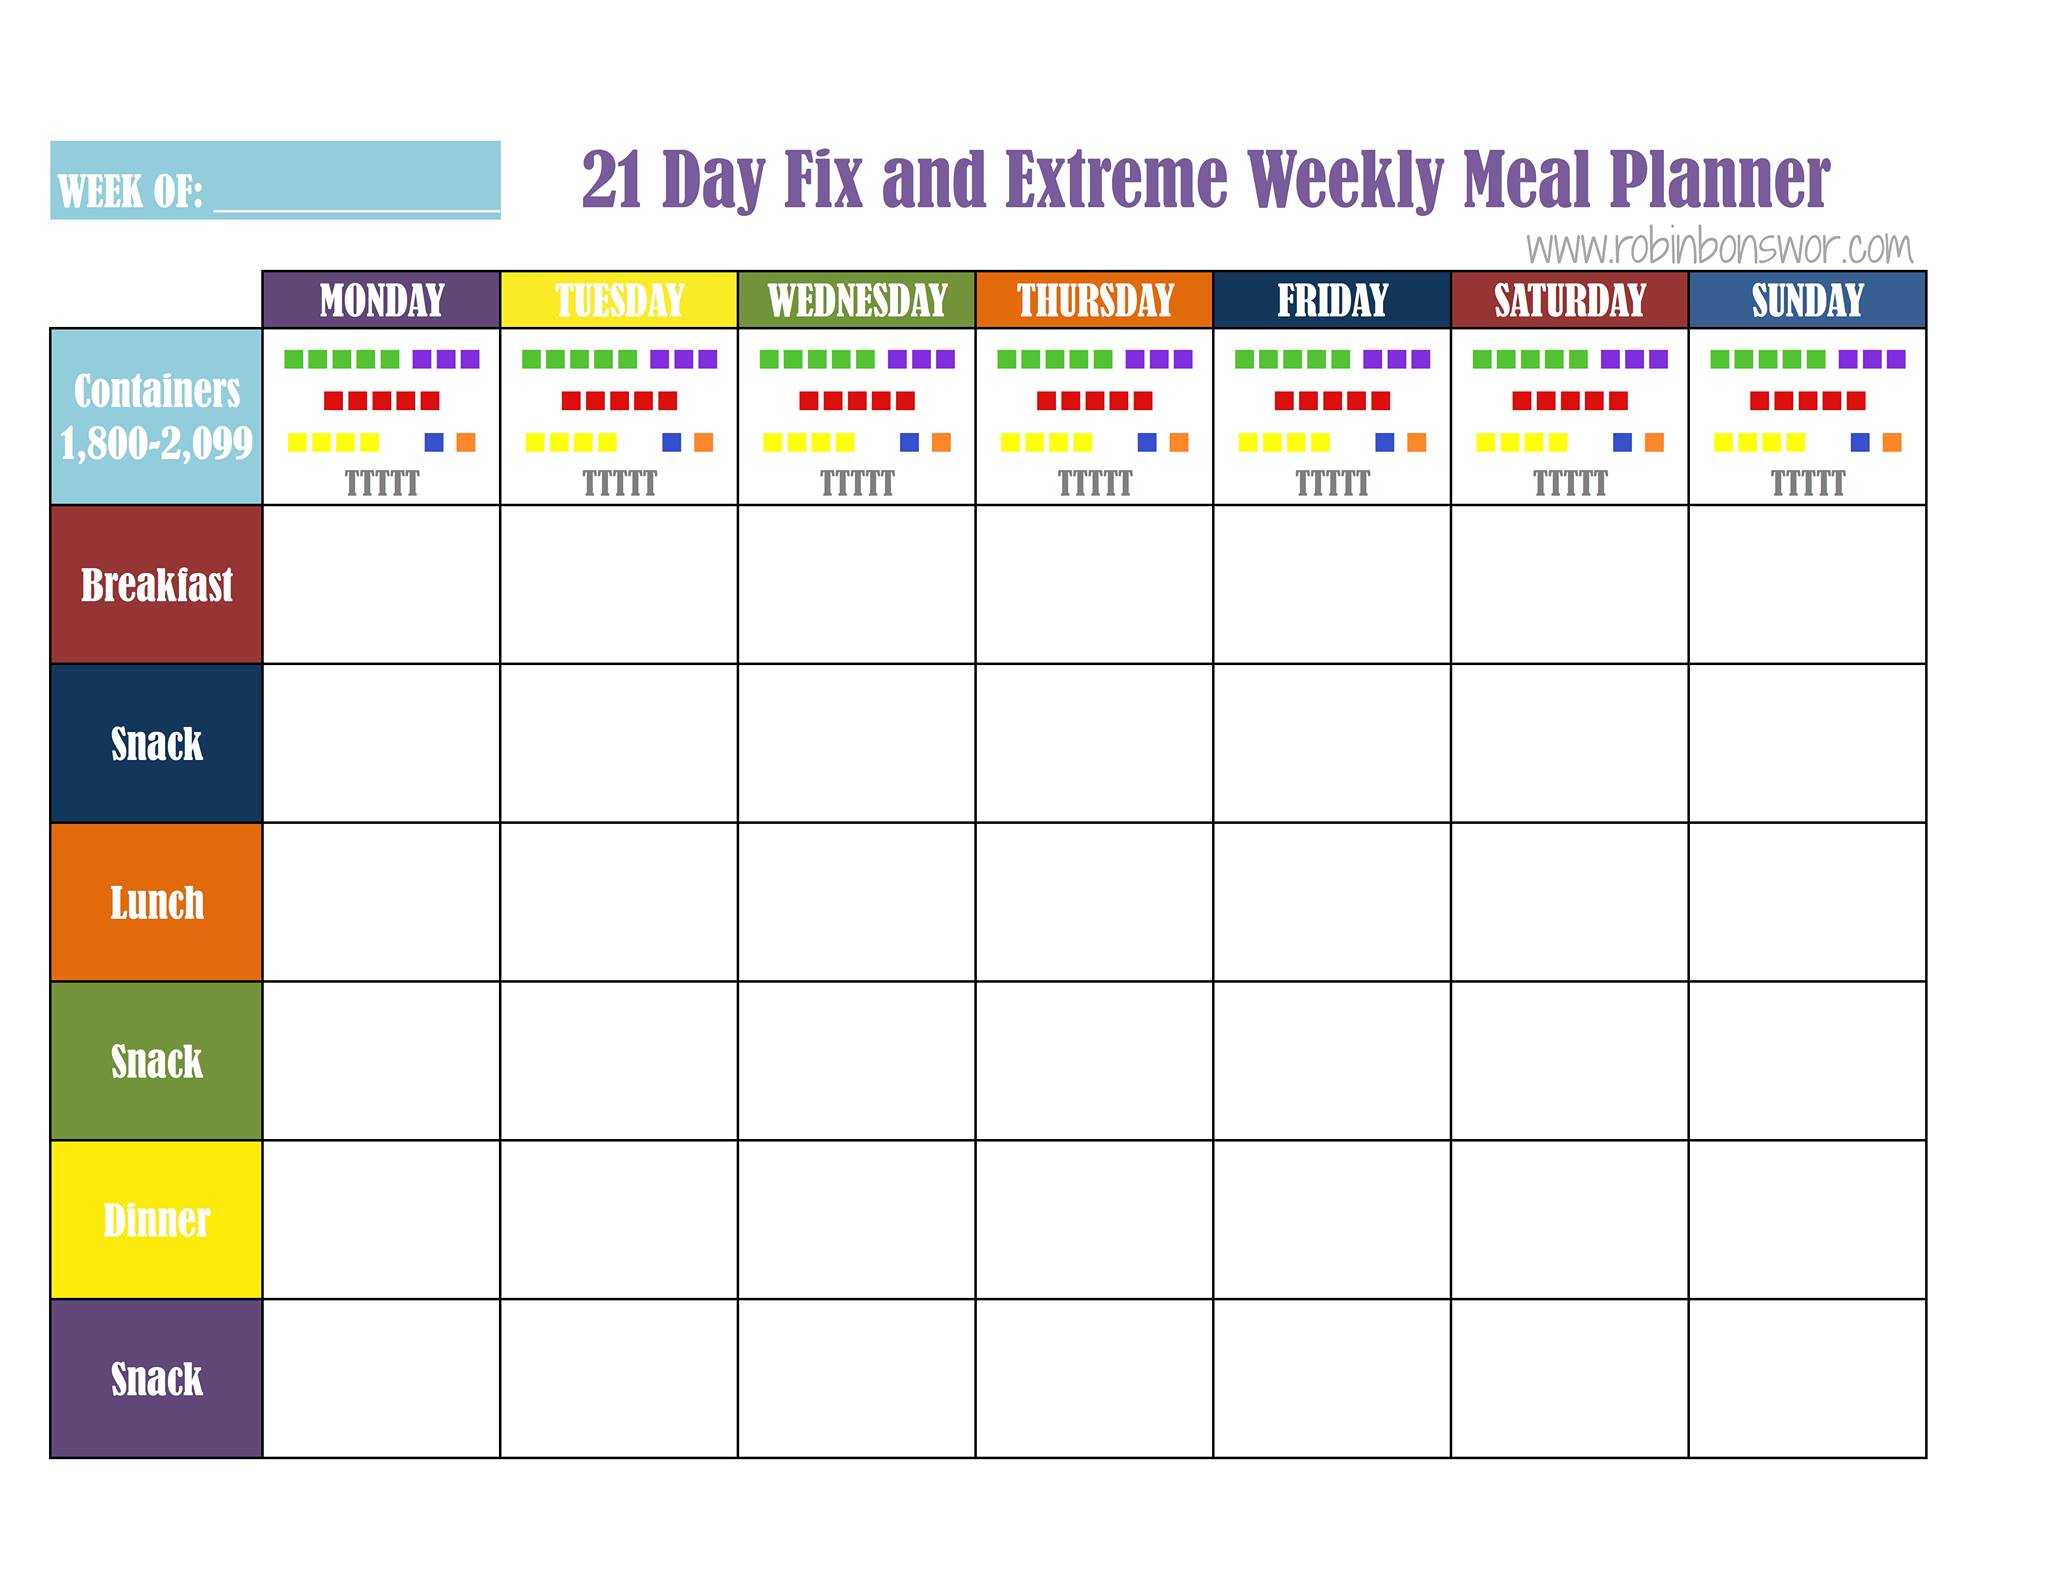 How to meal plan for the 21 Day Fix